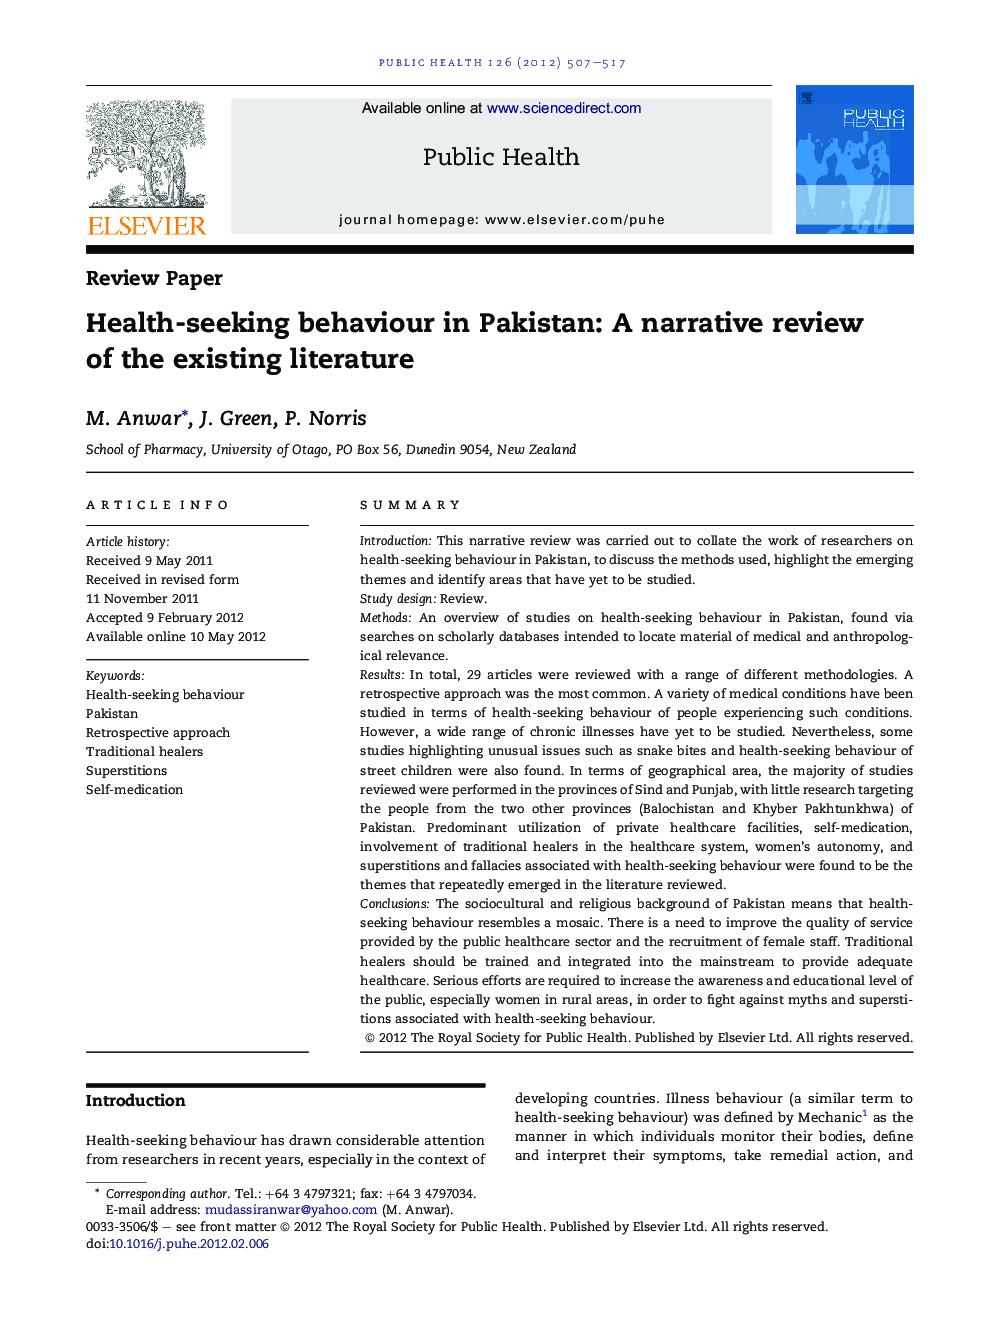 Health-seeking behaviour in Pakistan: A narrative review of the existing literature